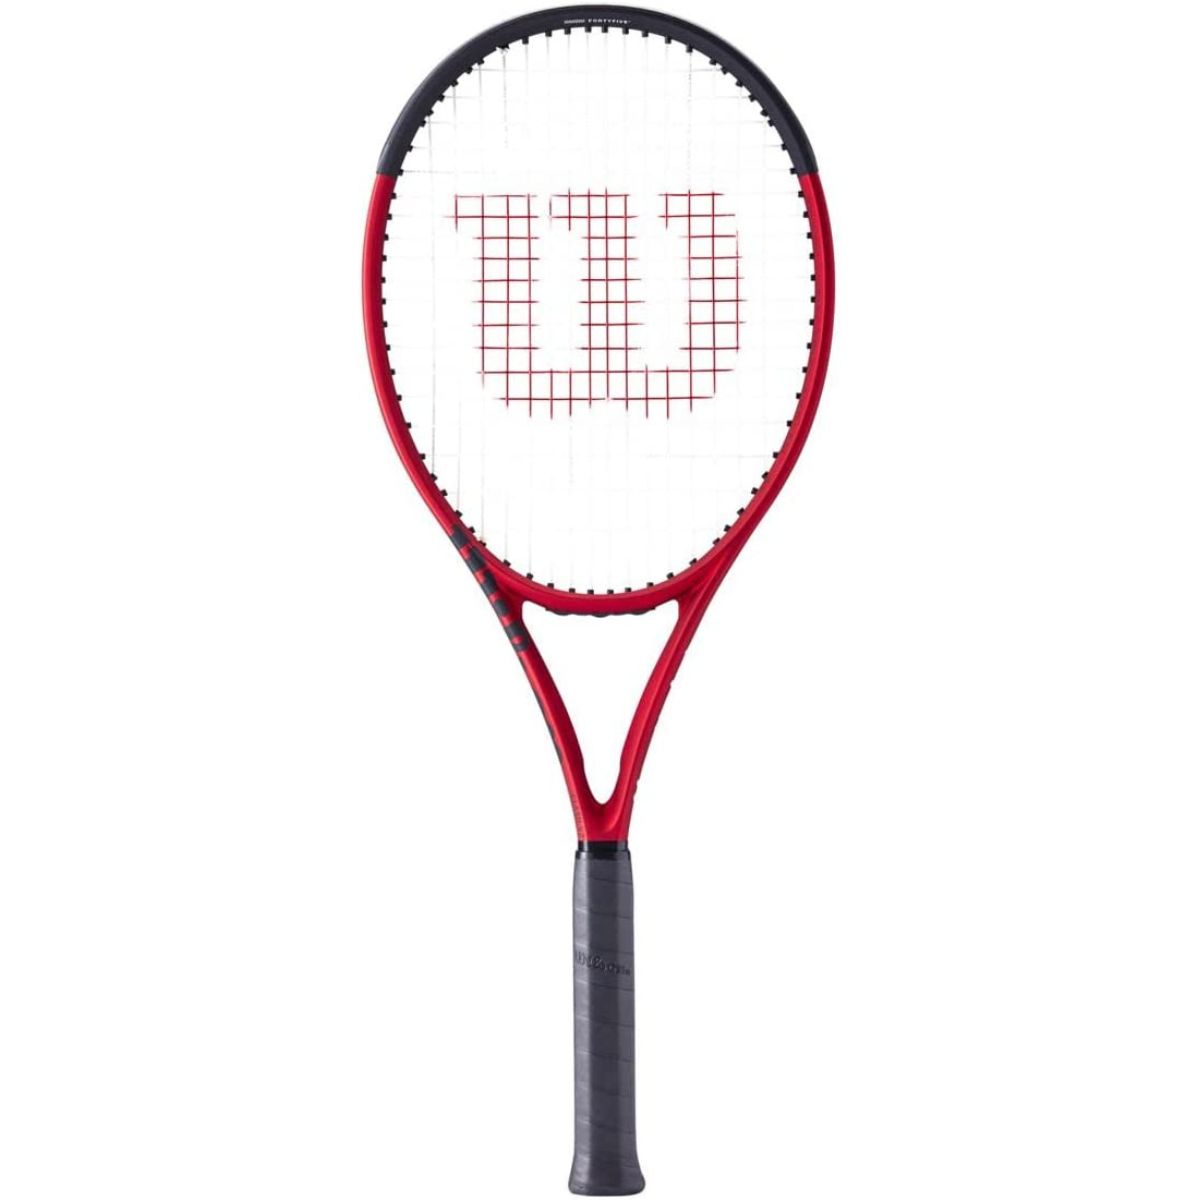 The Best Tennis Rackets for Tennis Elbow Options: Wilson Clash 100